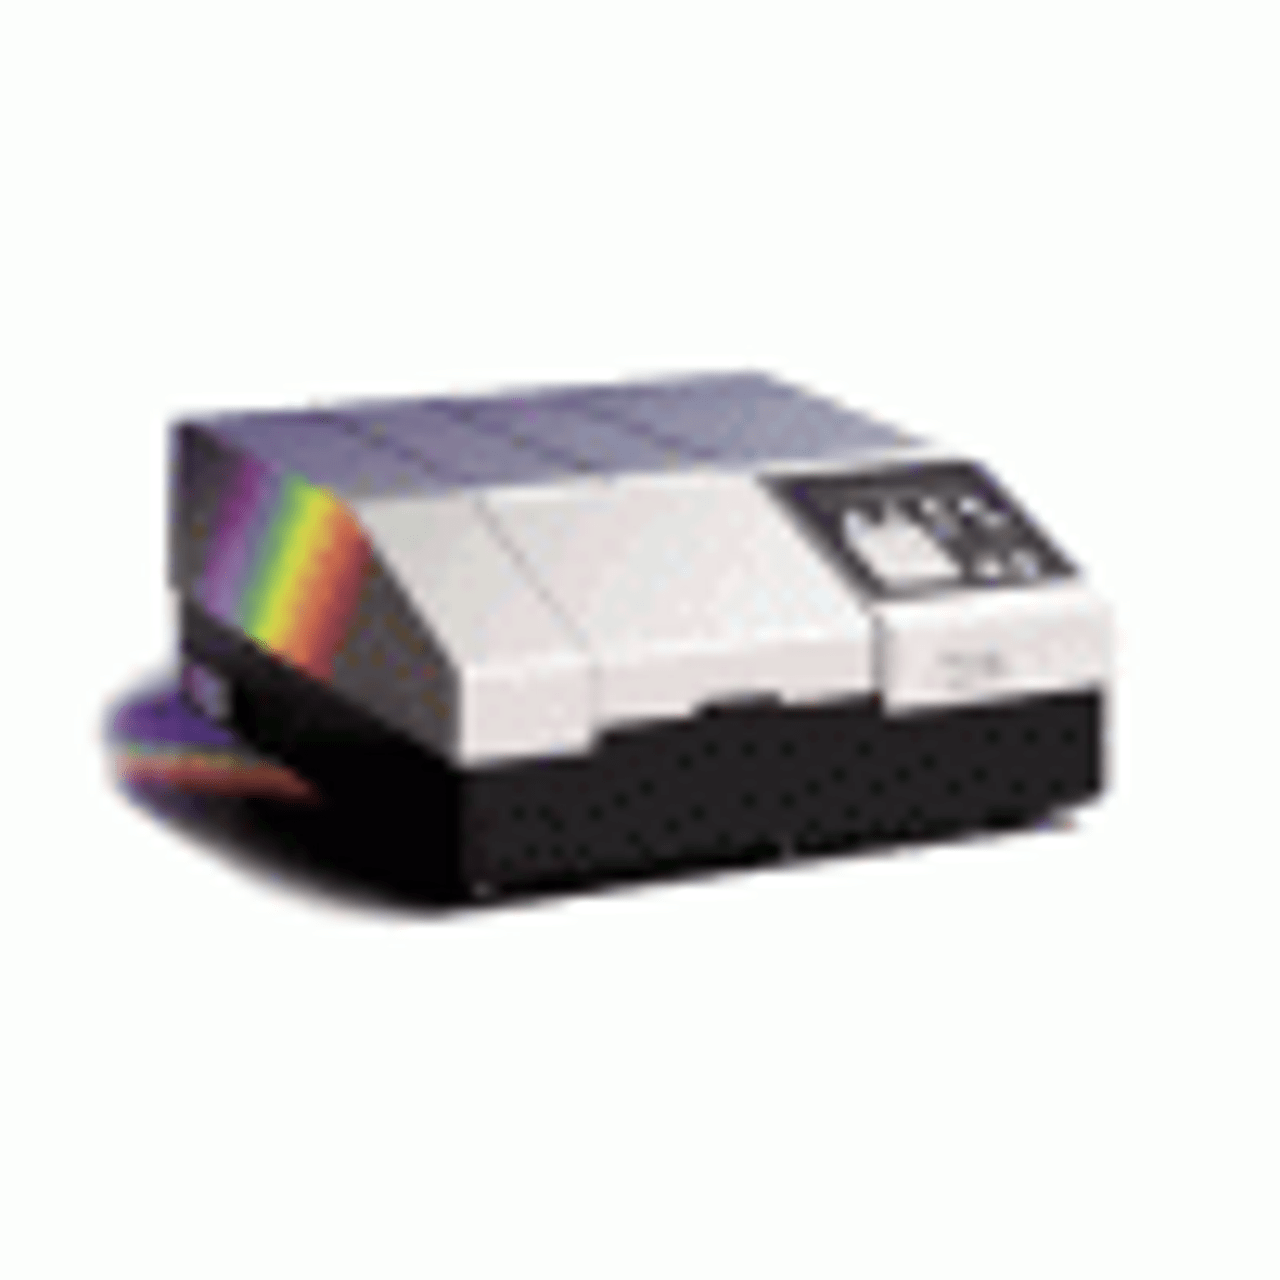 Micro-Plated Reader & Spectrophotometer